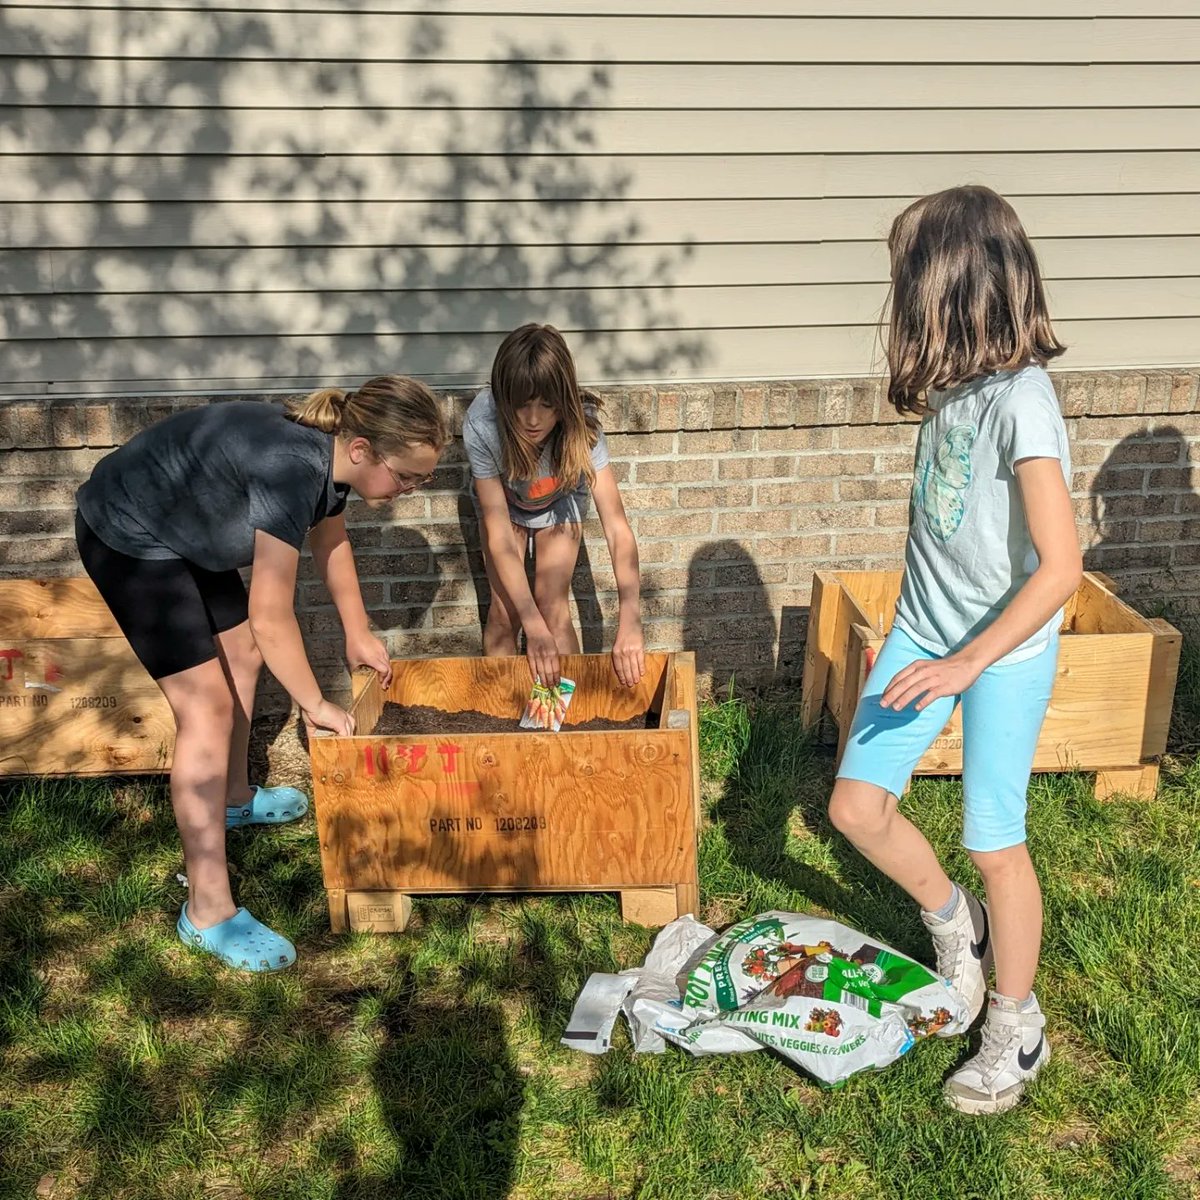 🌱🌿 Today, our learners rolled up their sleeves and got their hands dirty! 

We set up raised garden beds, studied each seed with care, measured diligently, and planted them just right, giving each one the space it needs to thrive. 

#LearningByDoing #DublinOhio #HilliardOhio